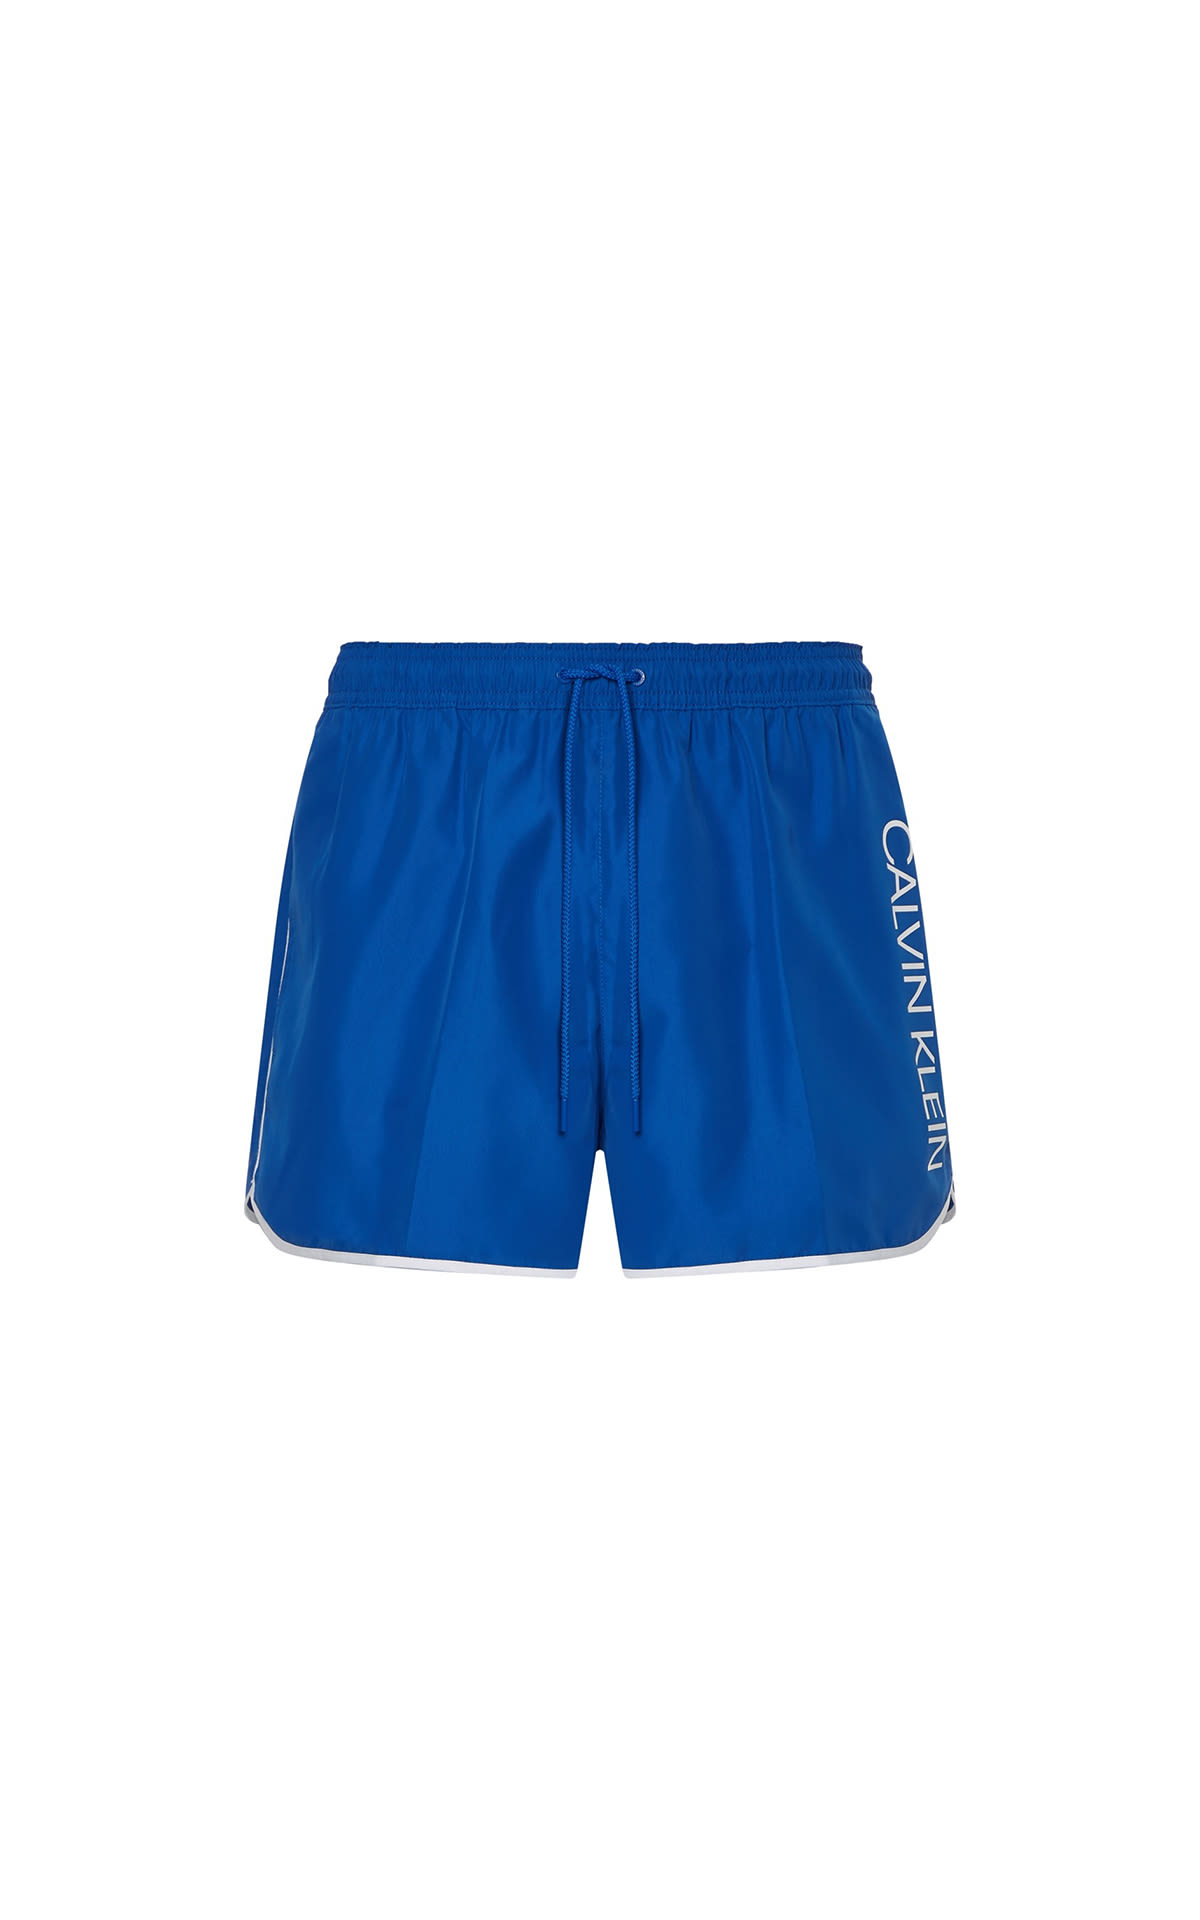 Runner shorts with logo